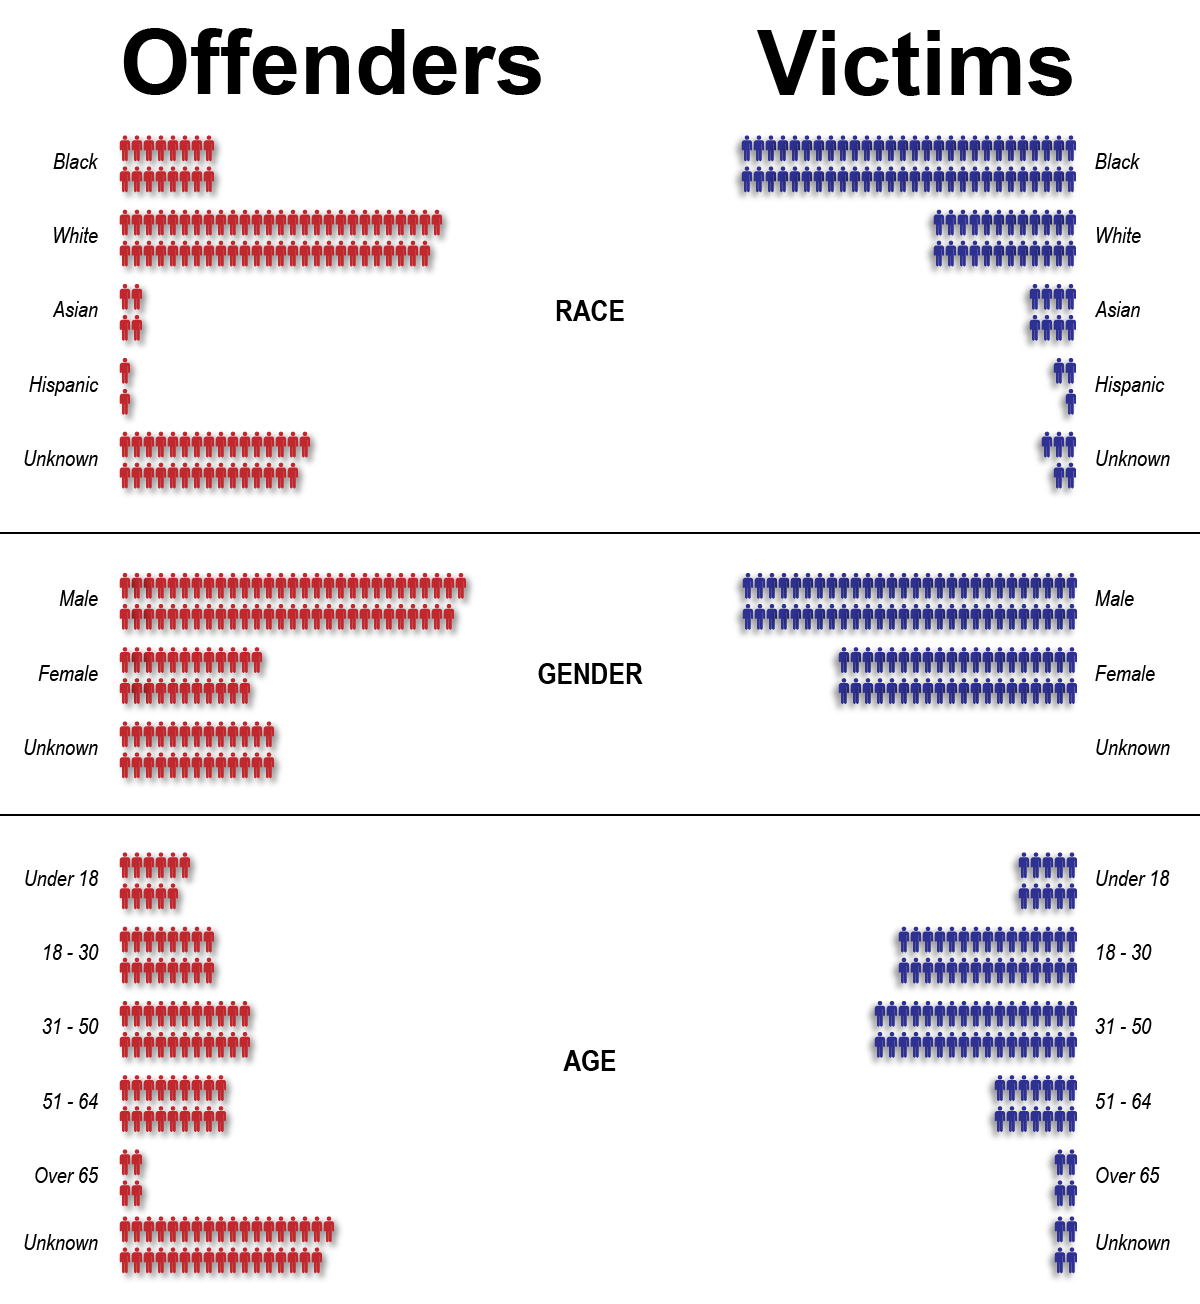 A pictogram showing the demographic details of the known offenders and victims of hate crimes in MAryland in 2021. Each victim is represented by a blue person icon, and each offender is represented in red.